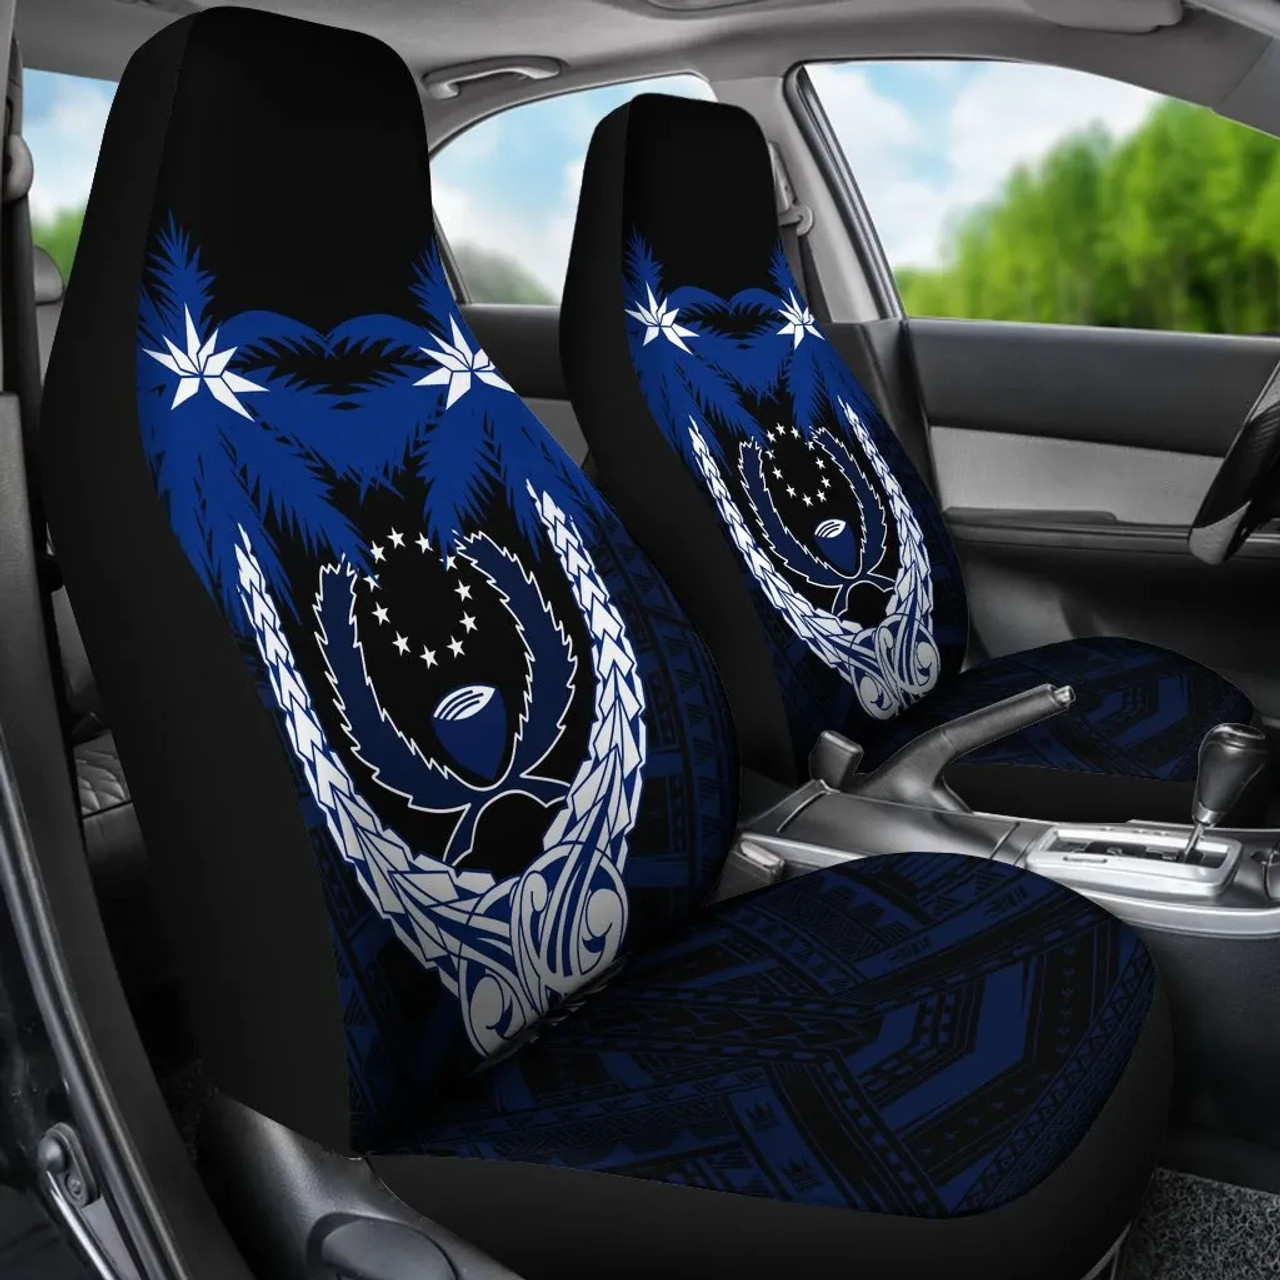 Pohnpei Micronesian Car Seat Covers - Pohnpei Flagg Coconut Tree (Set of 2)